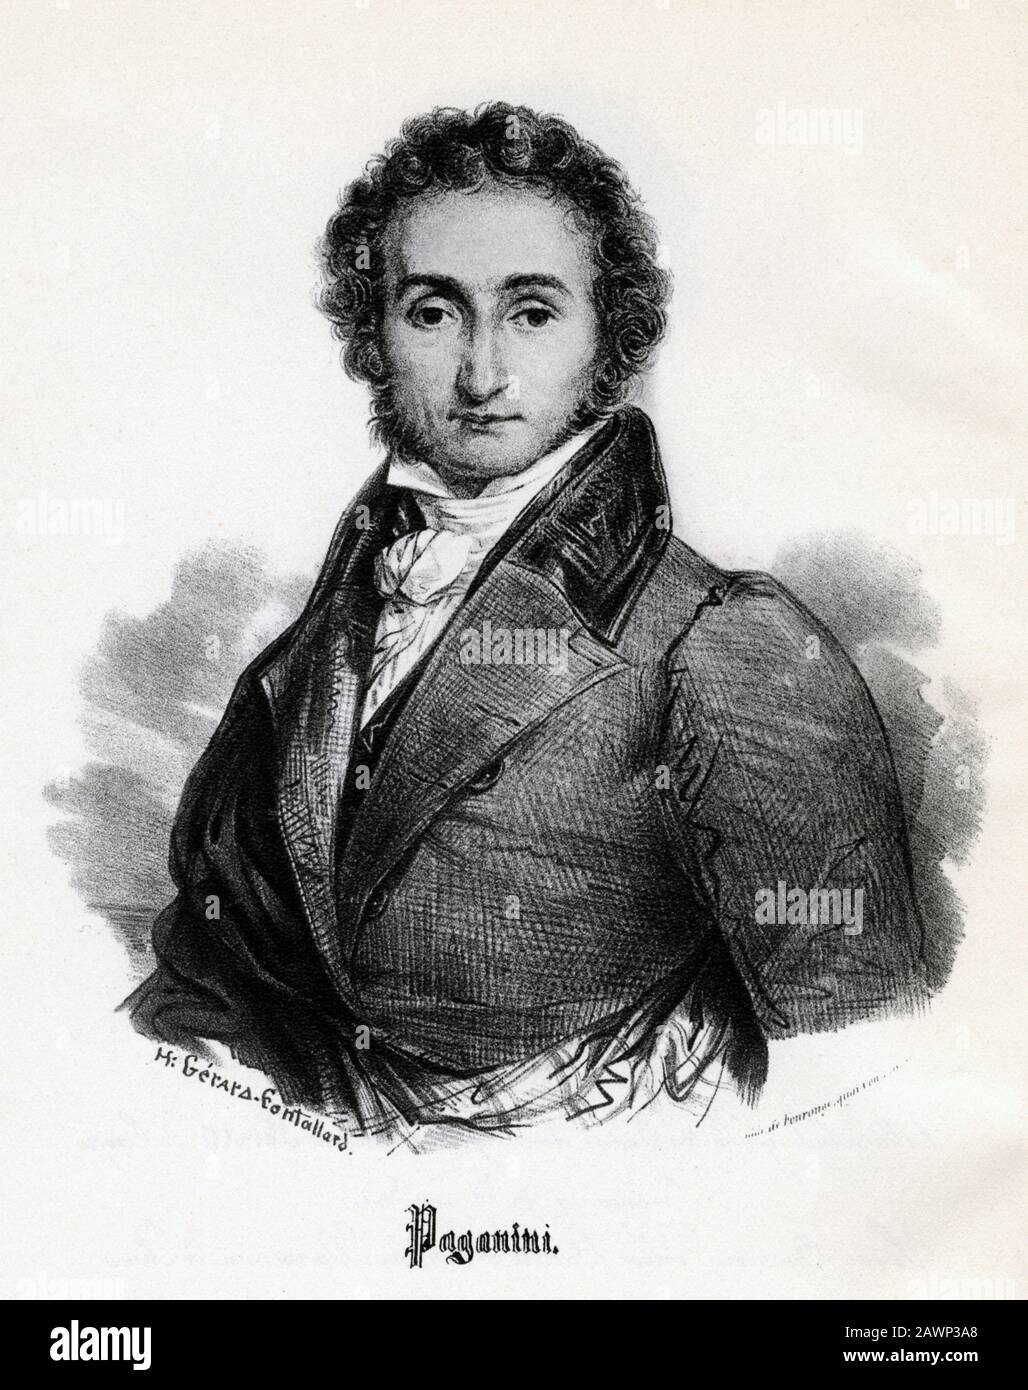 1831 , PARIS , FRANCE : The celebrated italian virtuoso violinist and music composer Niccolò PAGANINI ( 1782 - 1840 ). Portrait lithographed by Henri Stock Photo